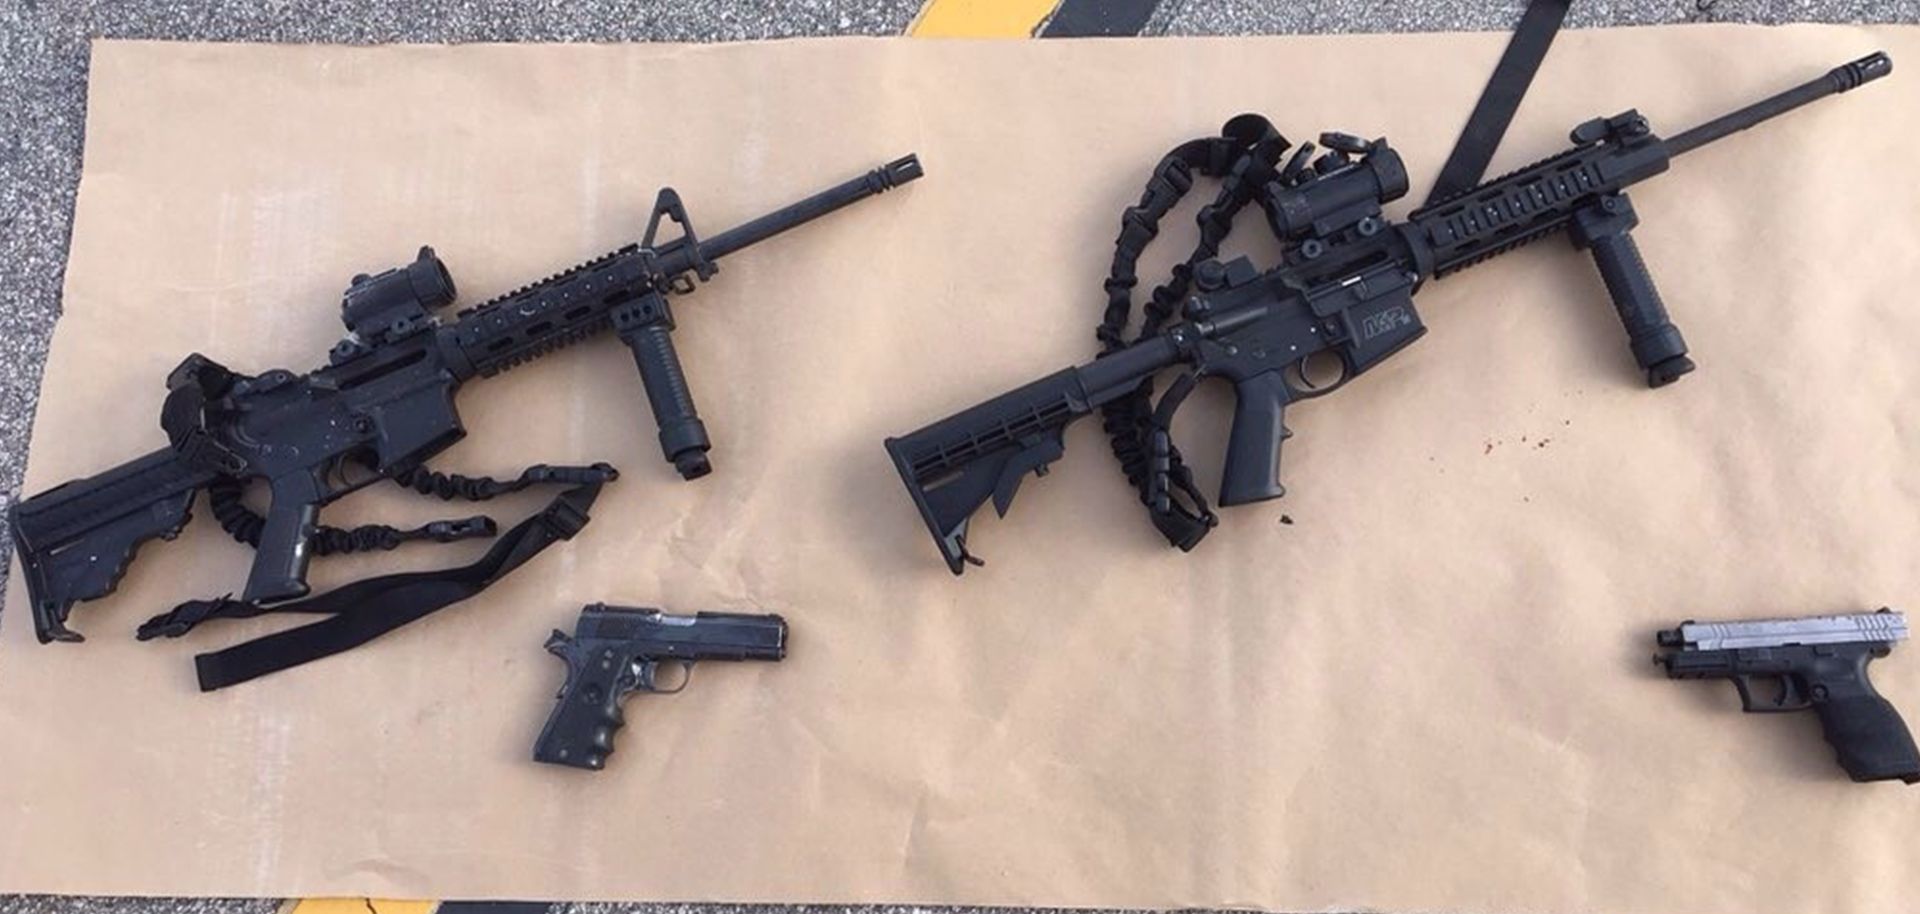 Four guns near the site of a shootout between police and suspects in the San Bernardino shootings, Dec. 4, 2015.